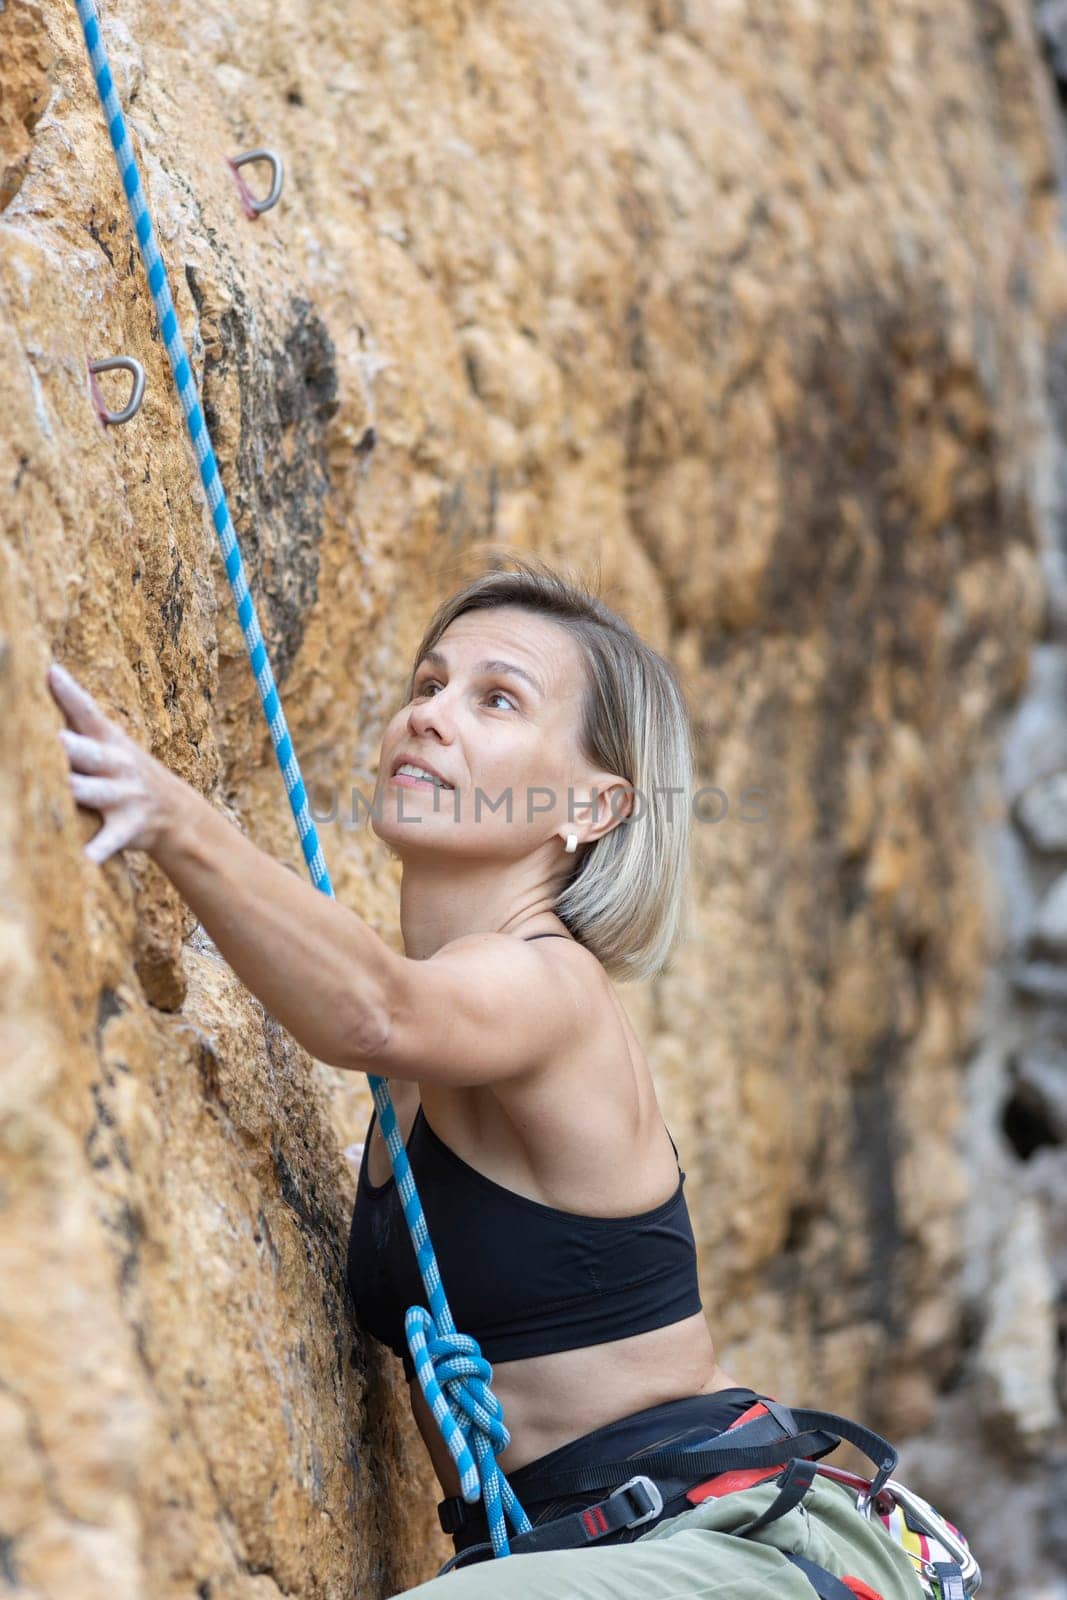 A woman is climbing a rock wall with a blue rope. She is wearing a black tank top and is looking up at the wall